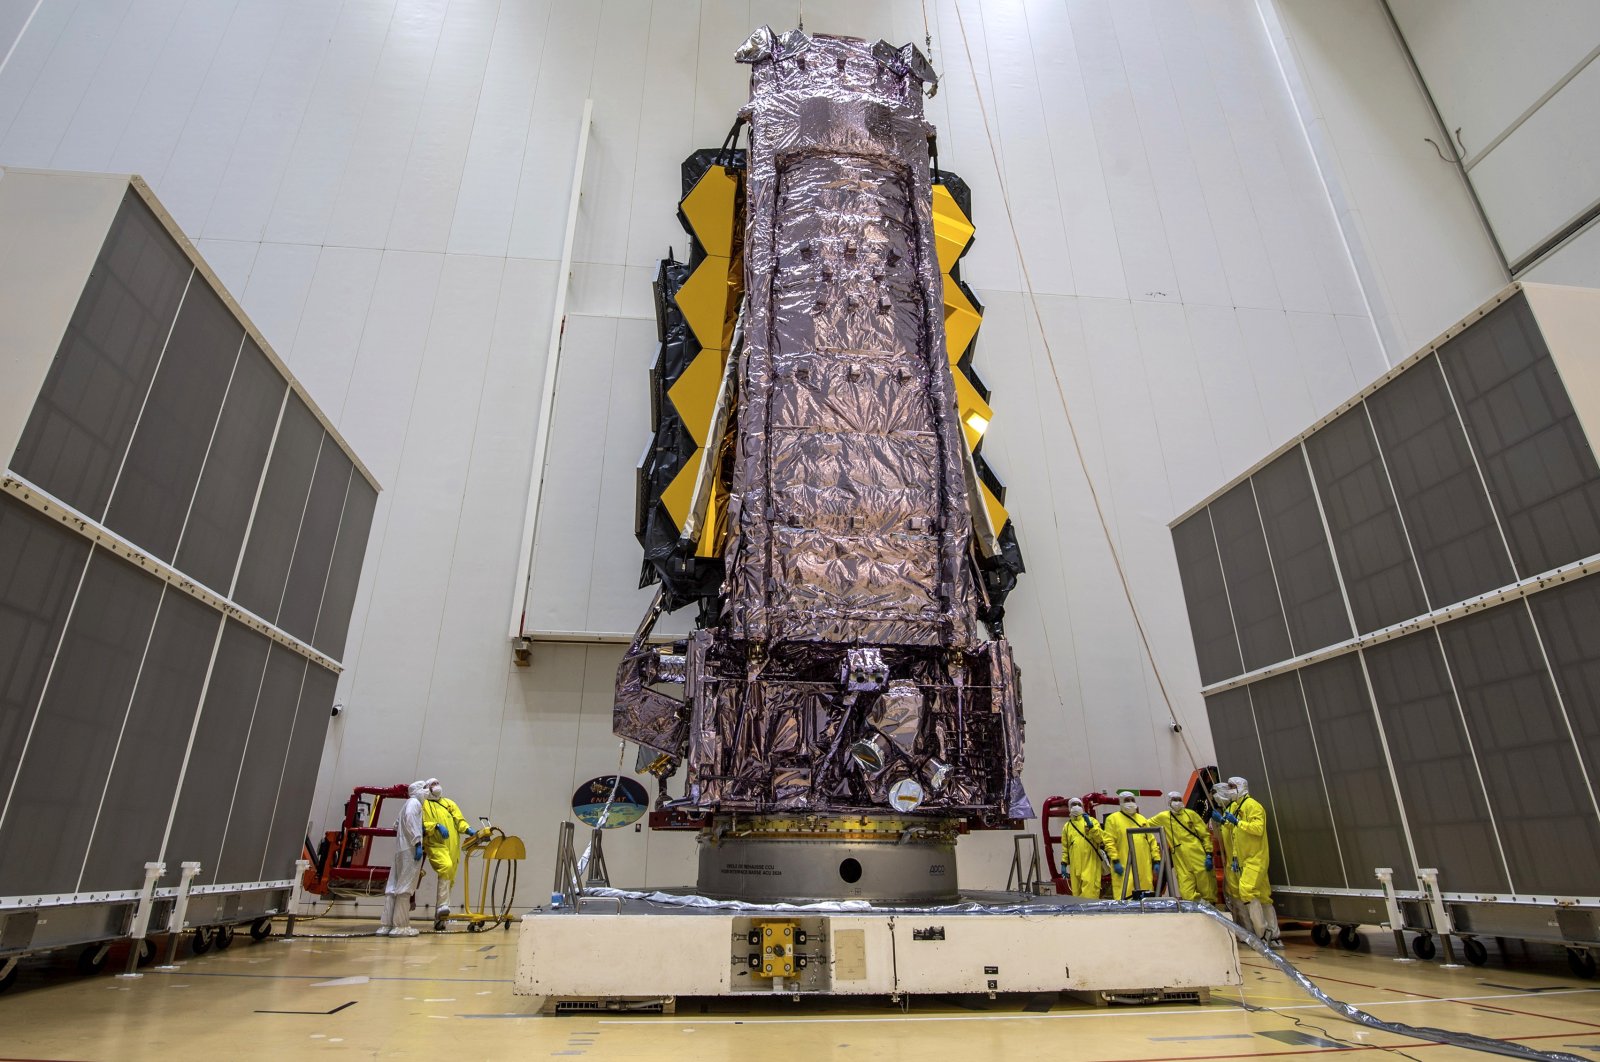 NASA’s James Webb Space Telescope is secured on top of the Ariane 5 rocket that will launch it to space from Europe’s Spaceport in Kourou, French Guiana, Dec. 11, 2021. (AP Photo)